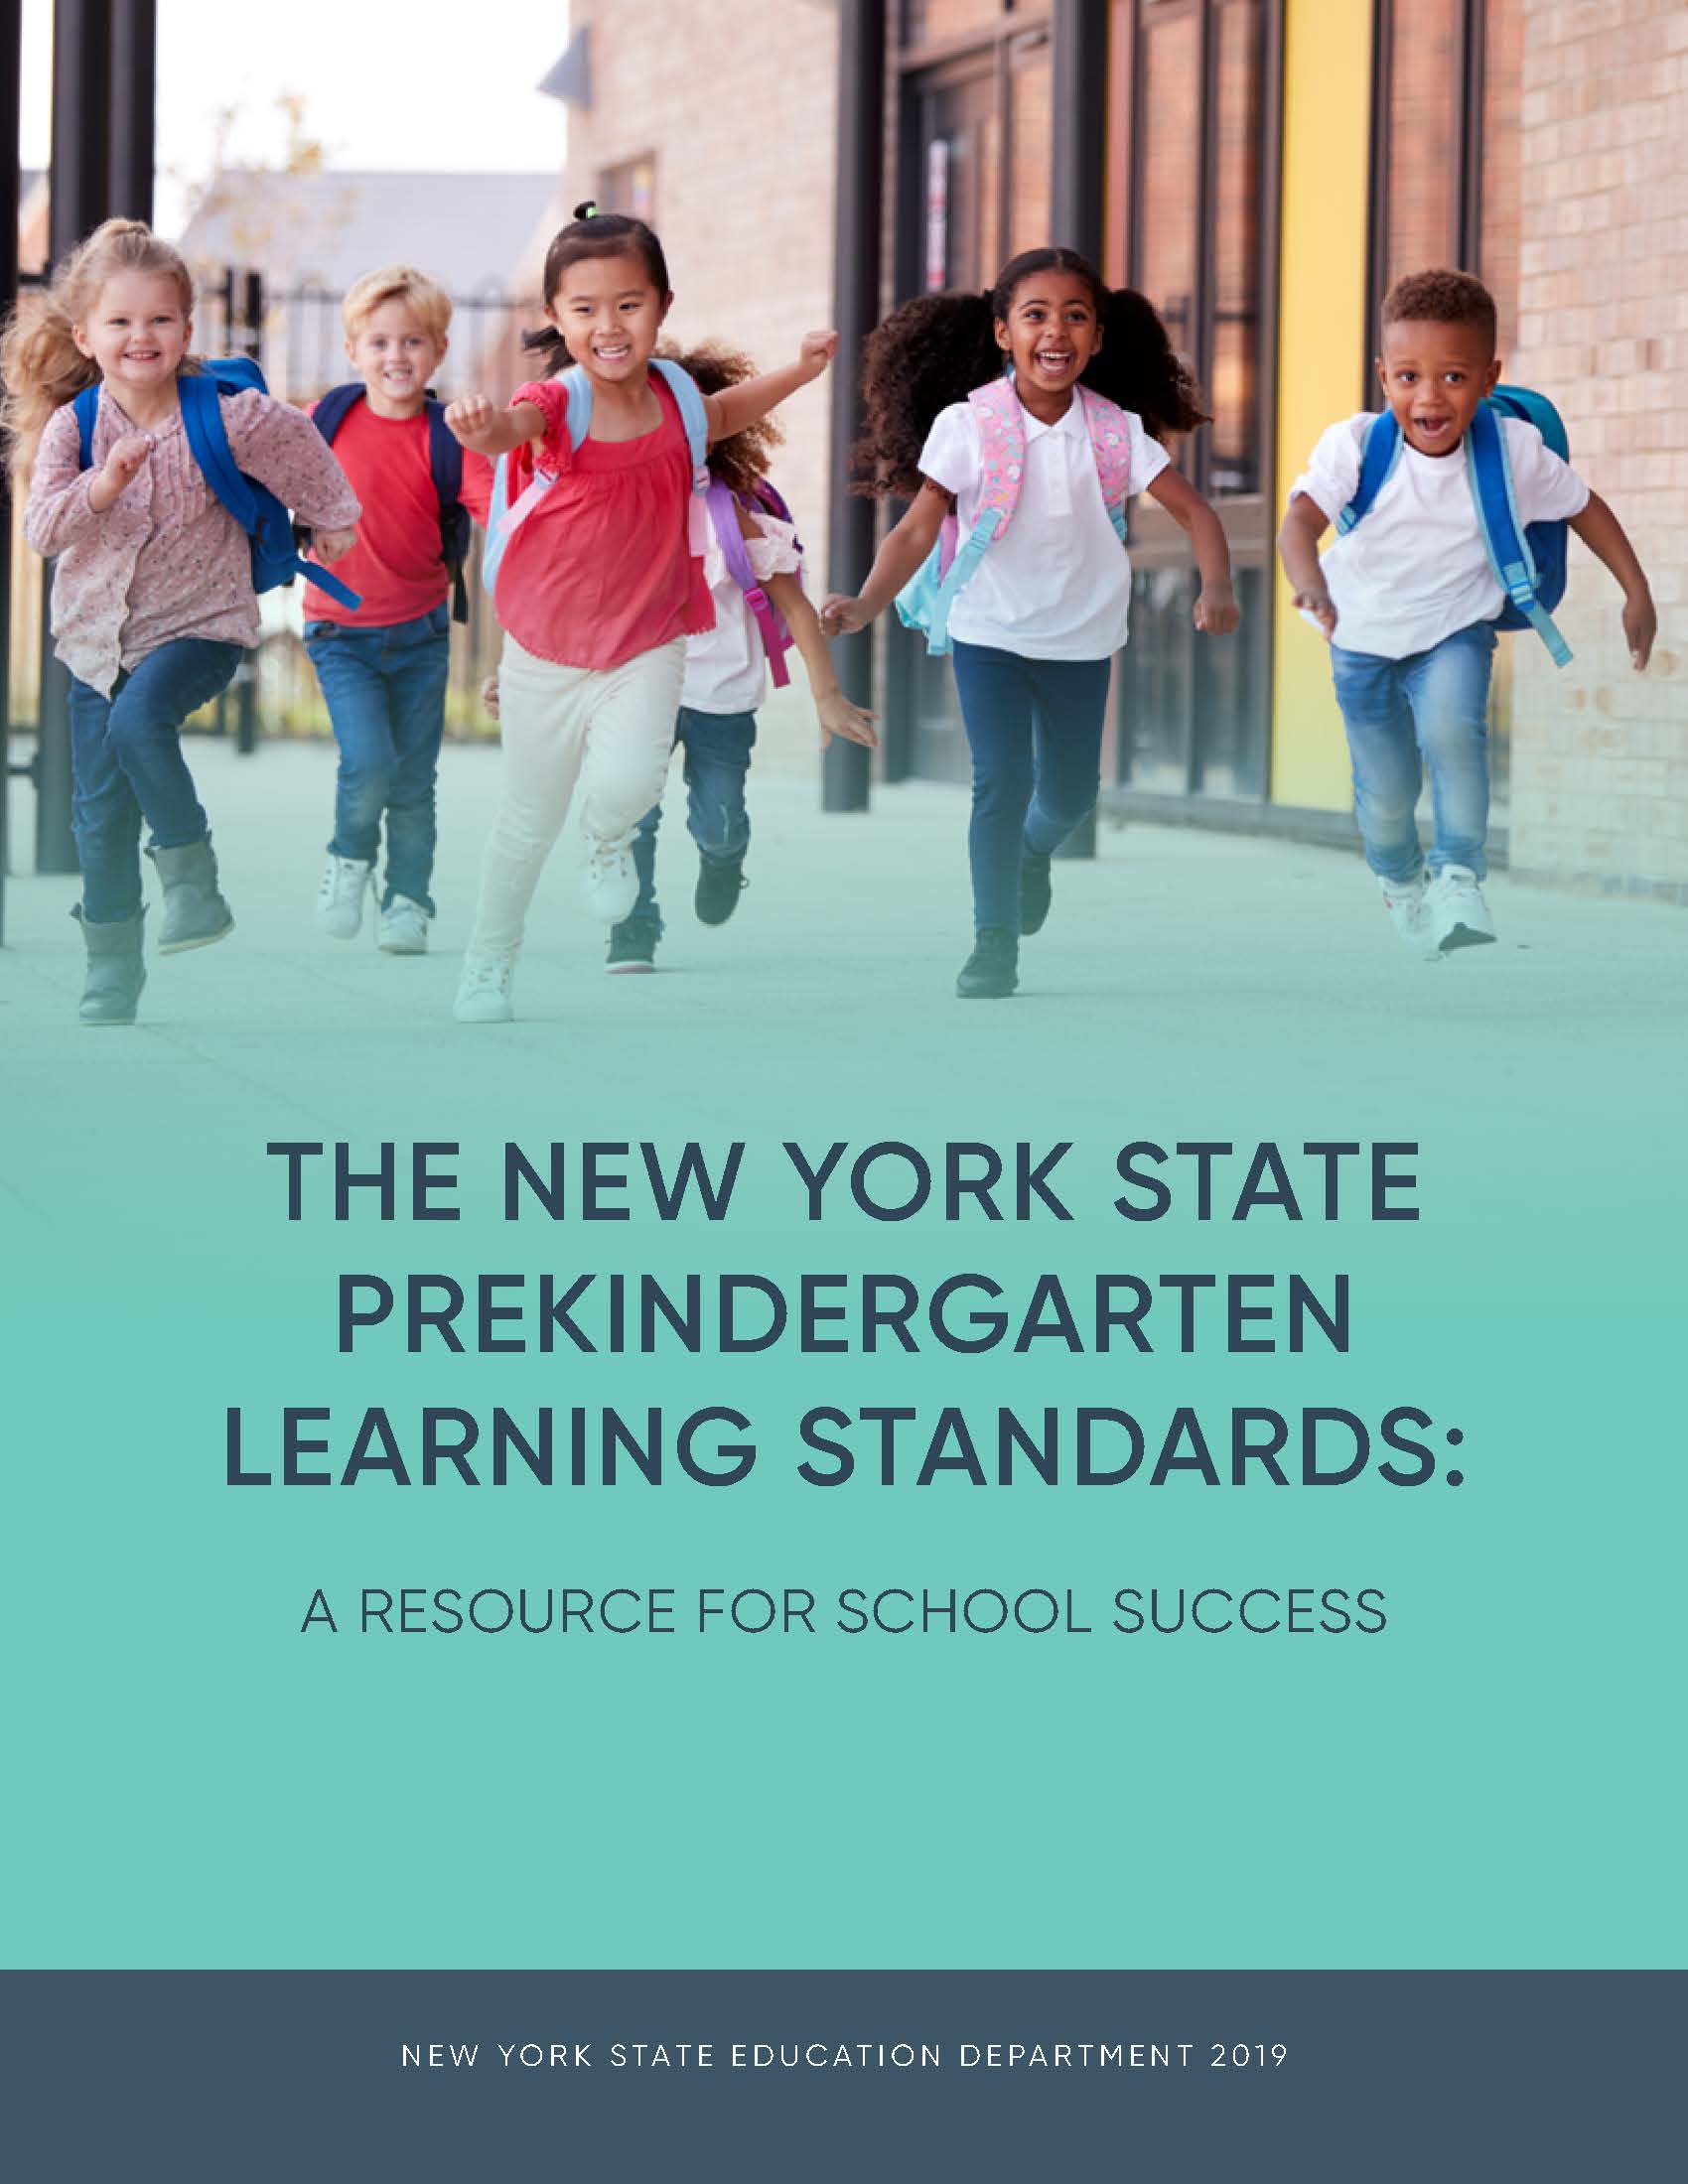 Cover image of the New York State Prekindergarten Learning Standards Resource